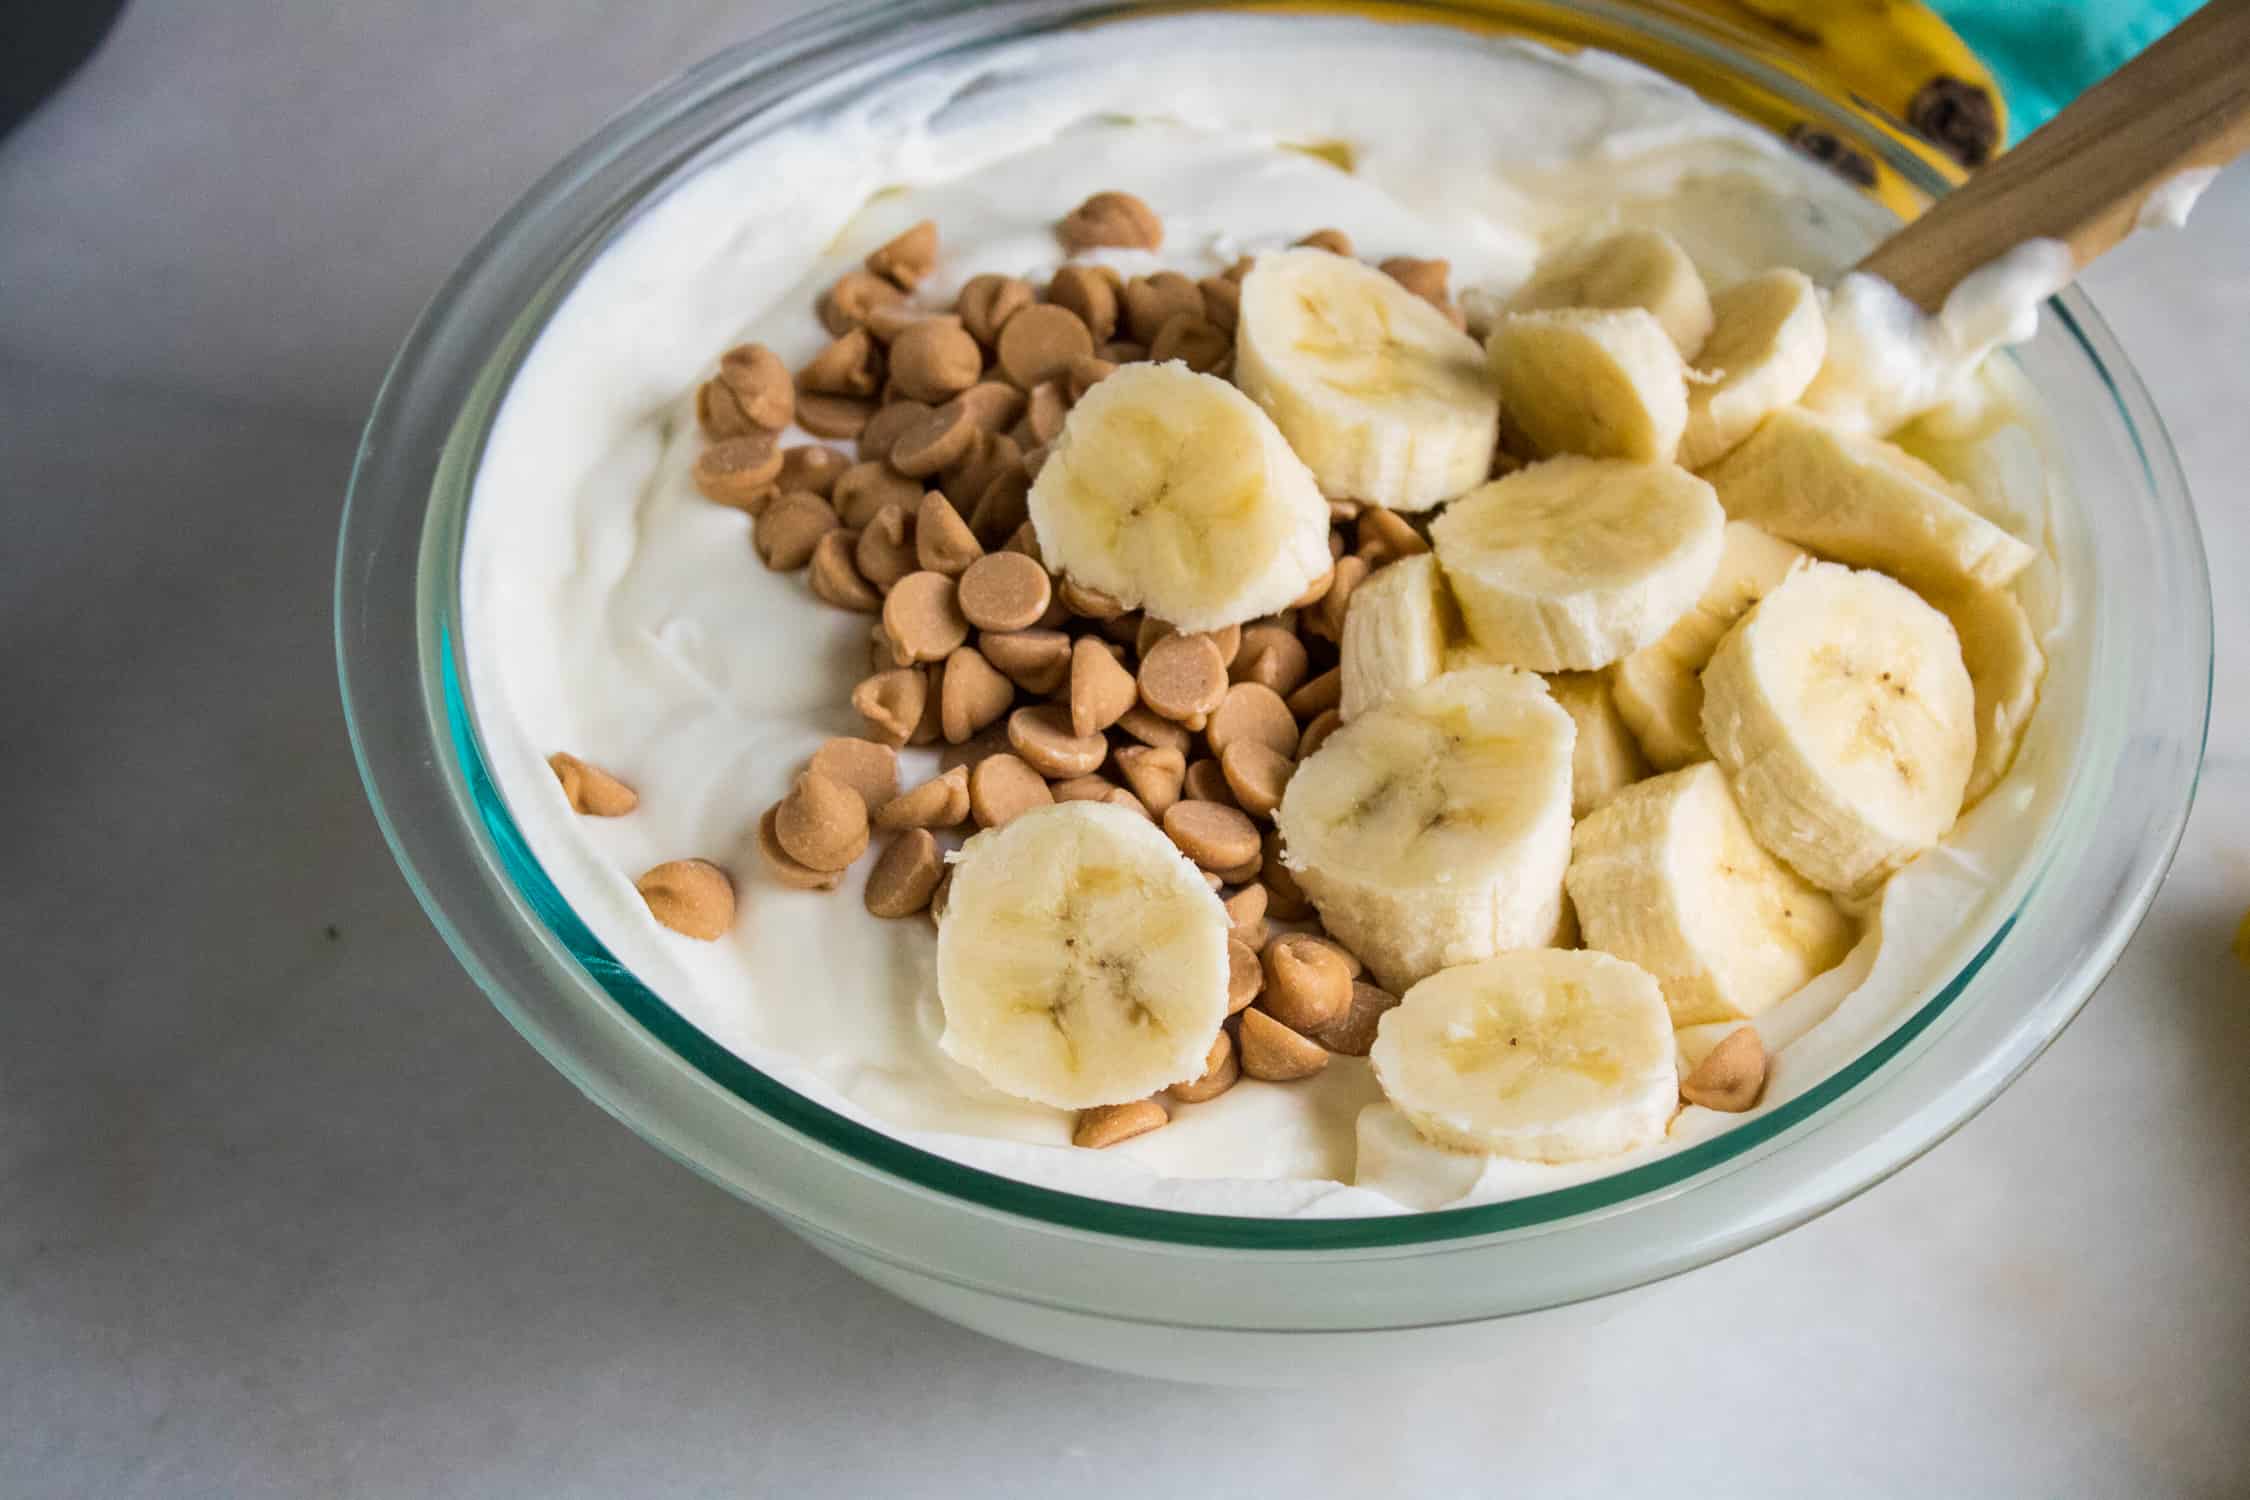 Reese's peanut butter chips and sliced bananas being mixed into a bowl of the ingredients for this no churn easy ice cream recipe